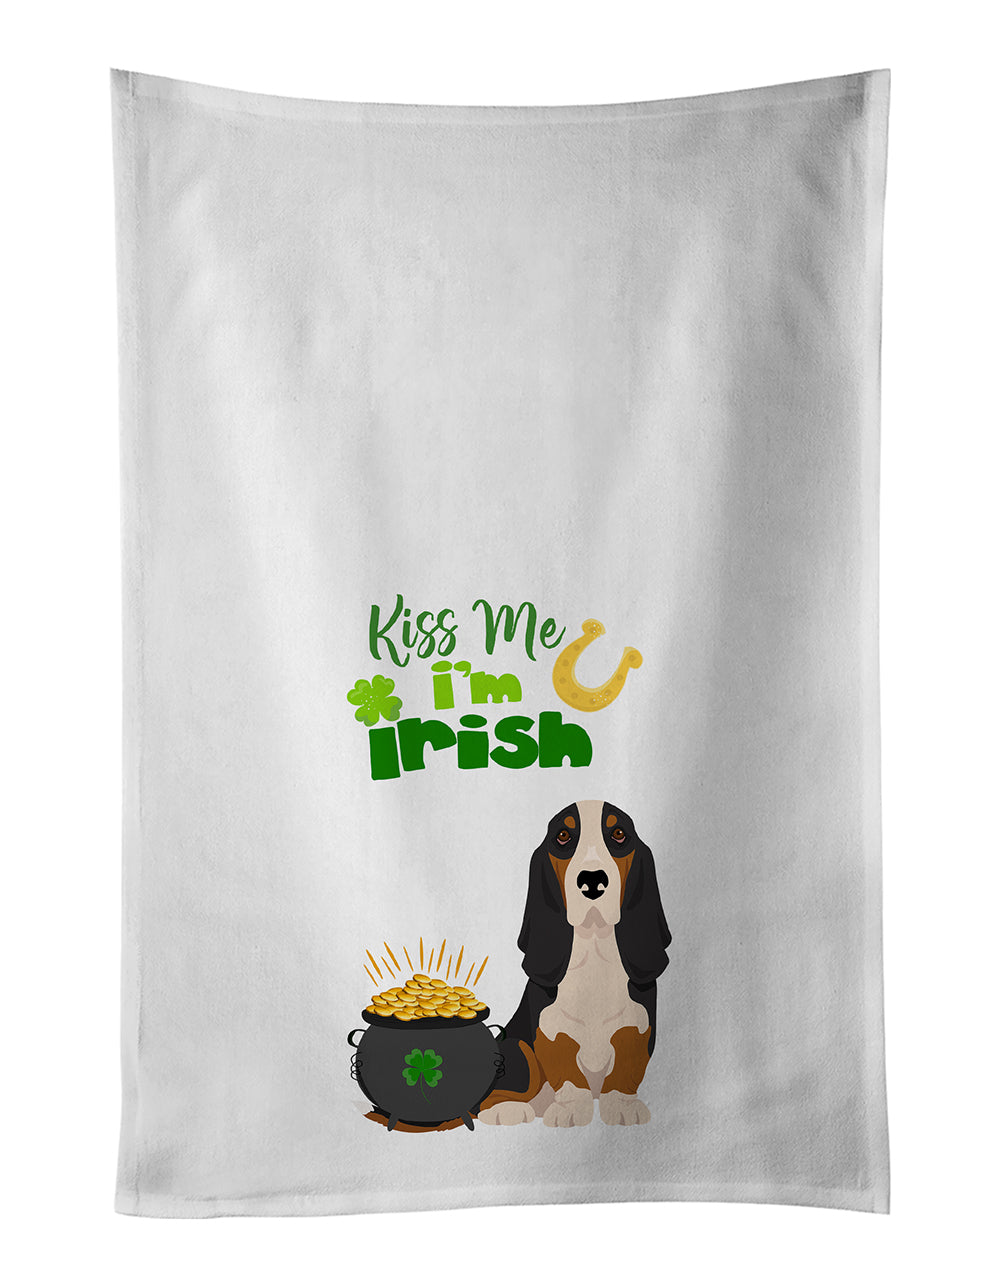 Buy this Black Tricolor Basset Hound St. Patrick's Day White Kitchen Towel Set of 2 Dish Towels